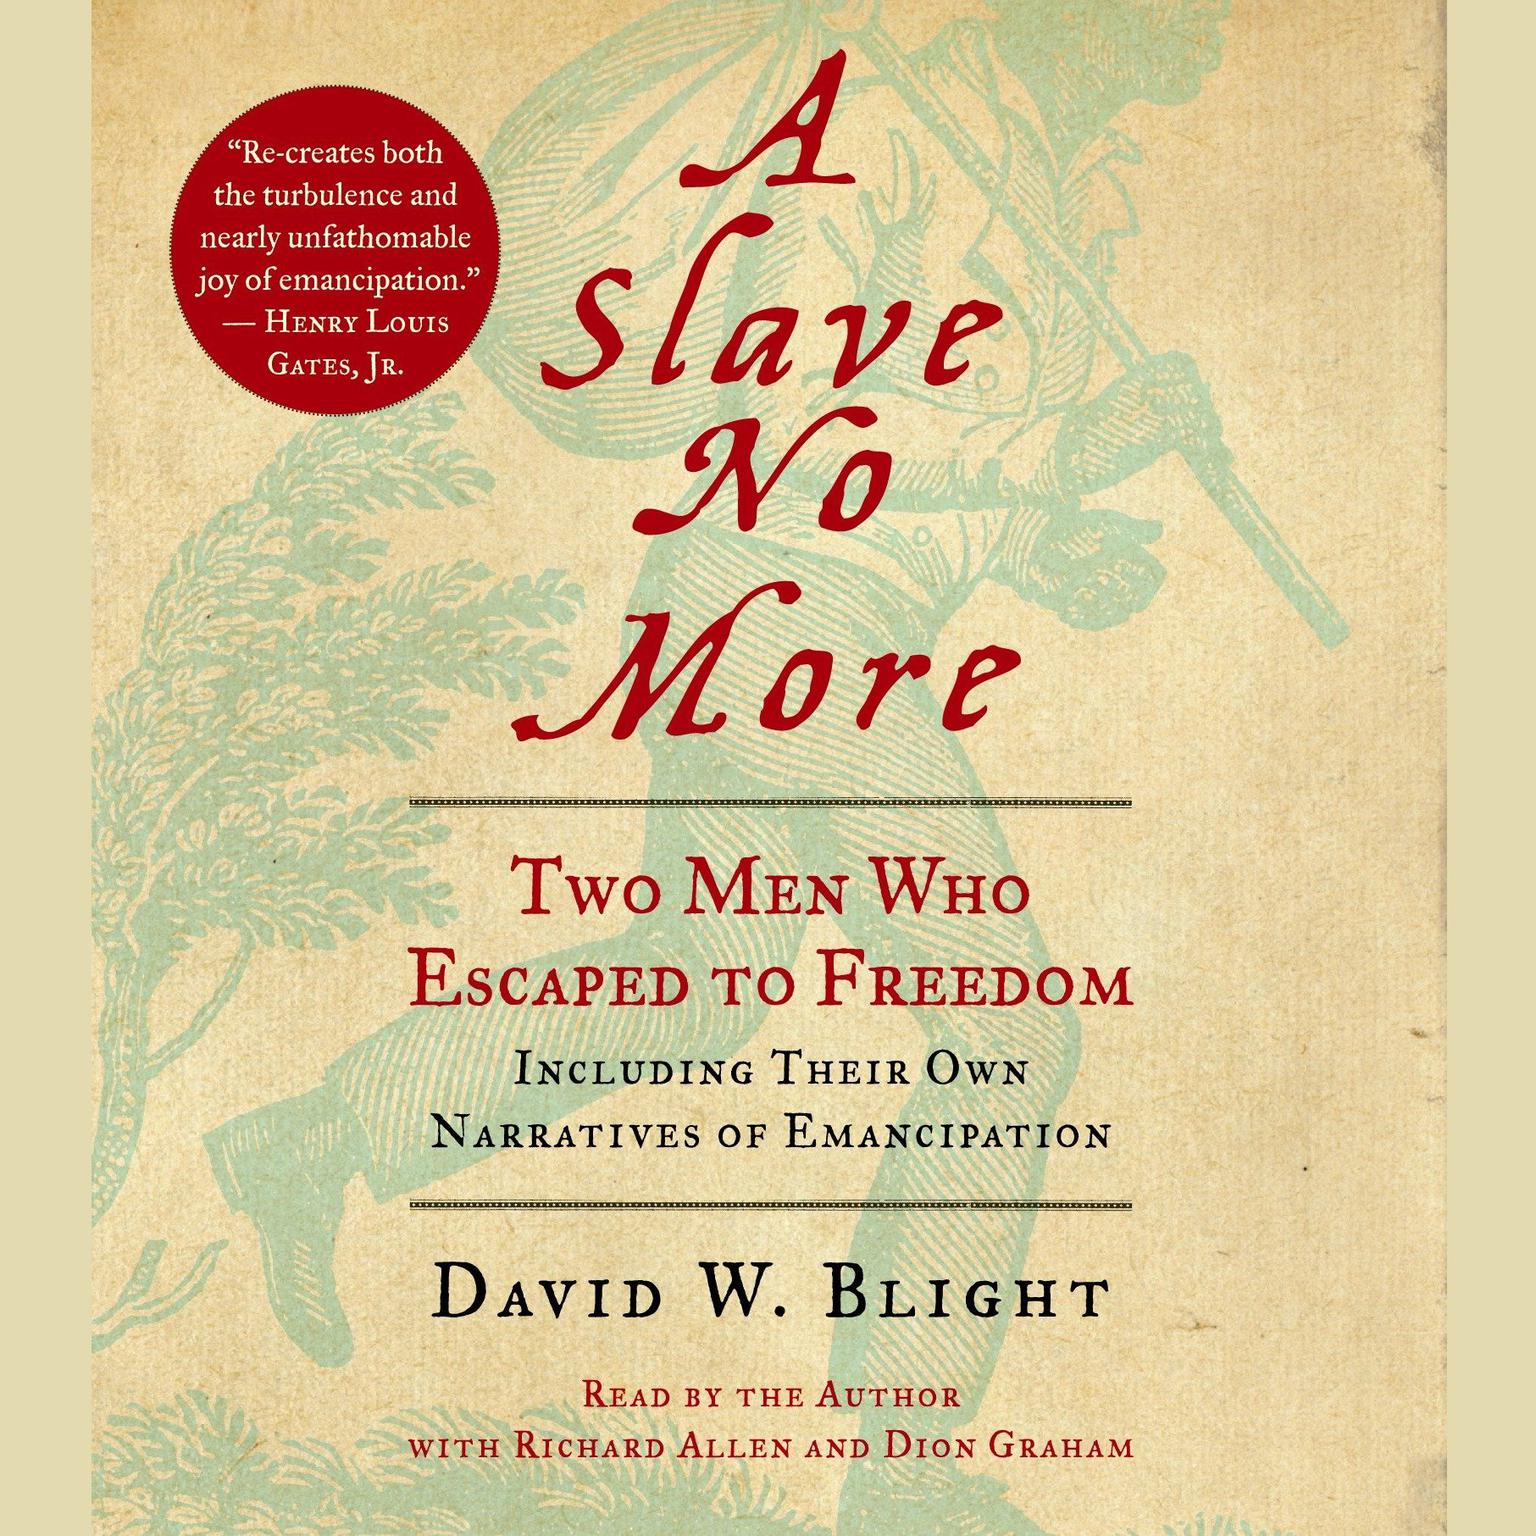 A Slave No More (Abridged): Two Men Who Escaped to Freedom, Including Their Own Narratives of Emancipation Audiobook, by David W. Blight